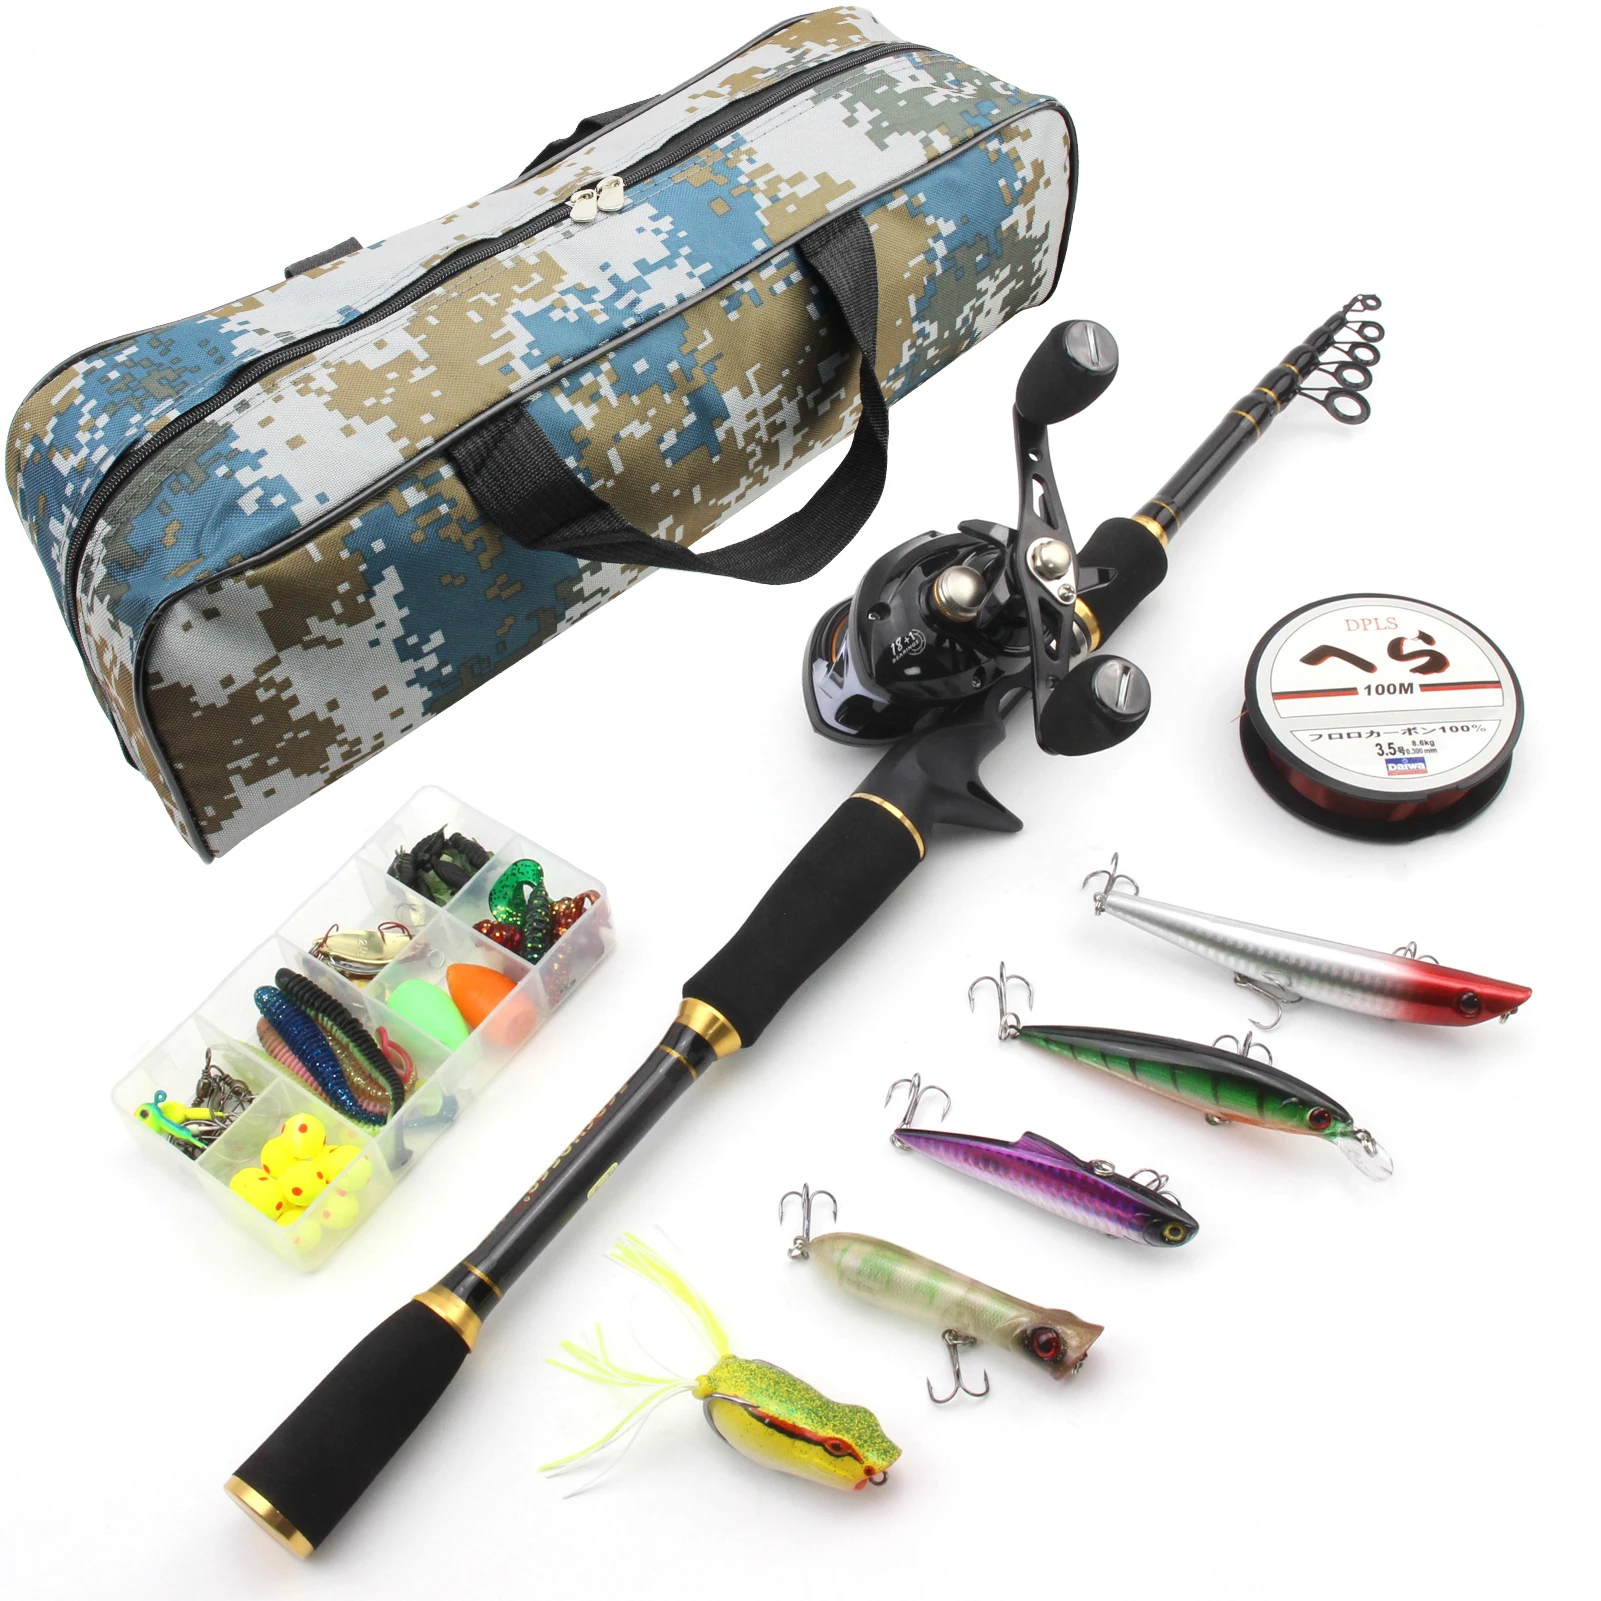 

NEW 1.8M-2.7M Fishing rod with reel and bag lure Casting Rod Reels Set carbon lure fishing pole telescopic Trout rod Reel Combos